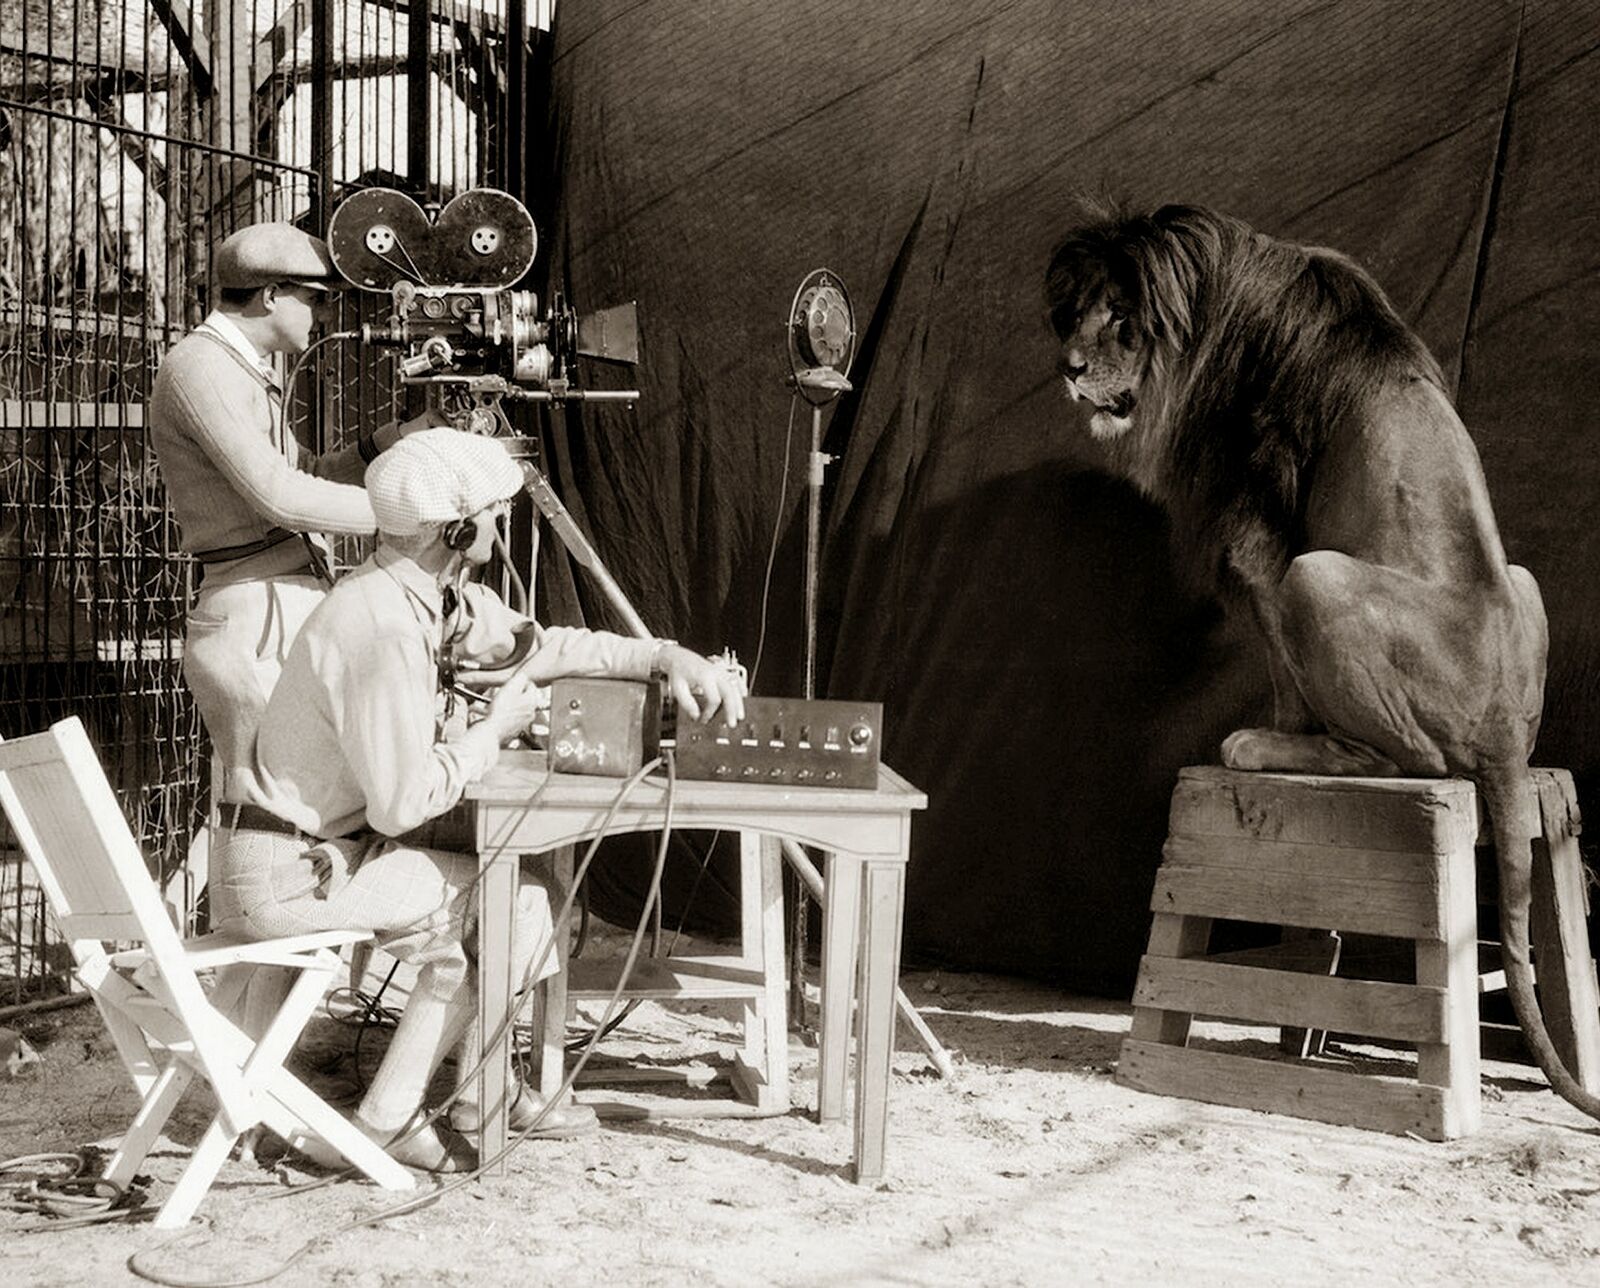 1929 FILMING THE MGM LION Photo  (179-p )